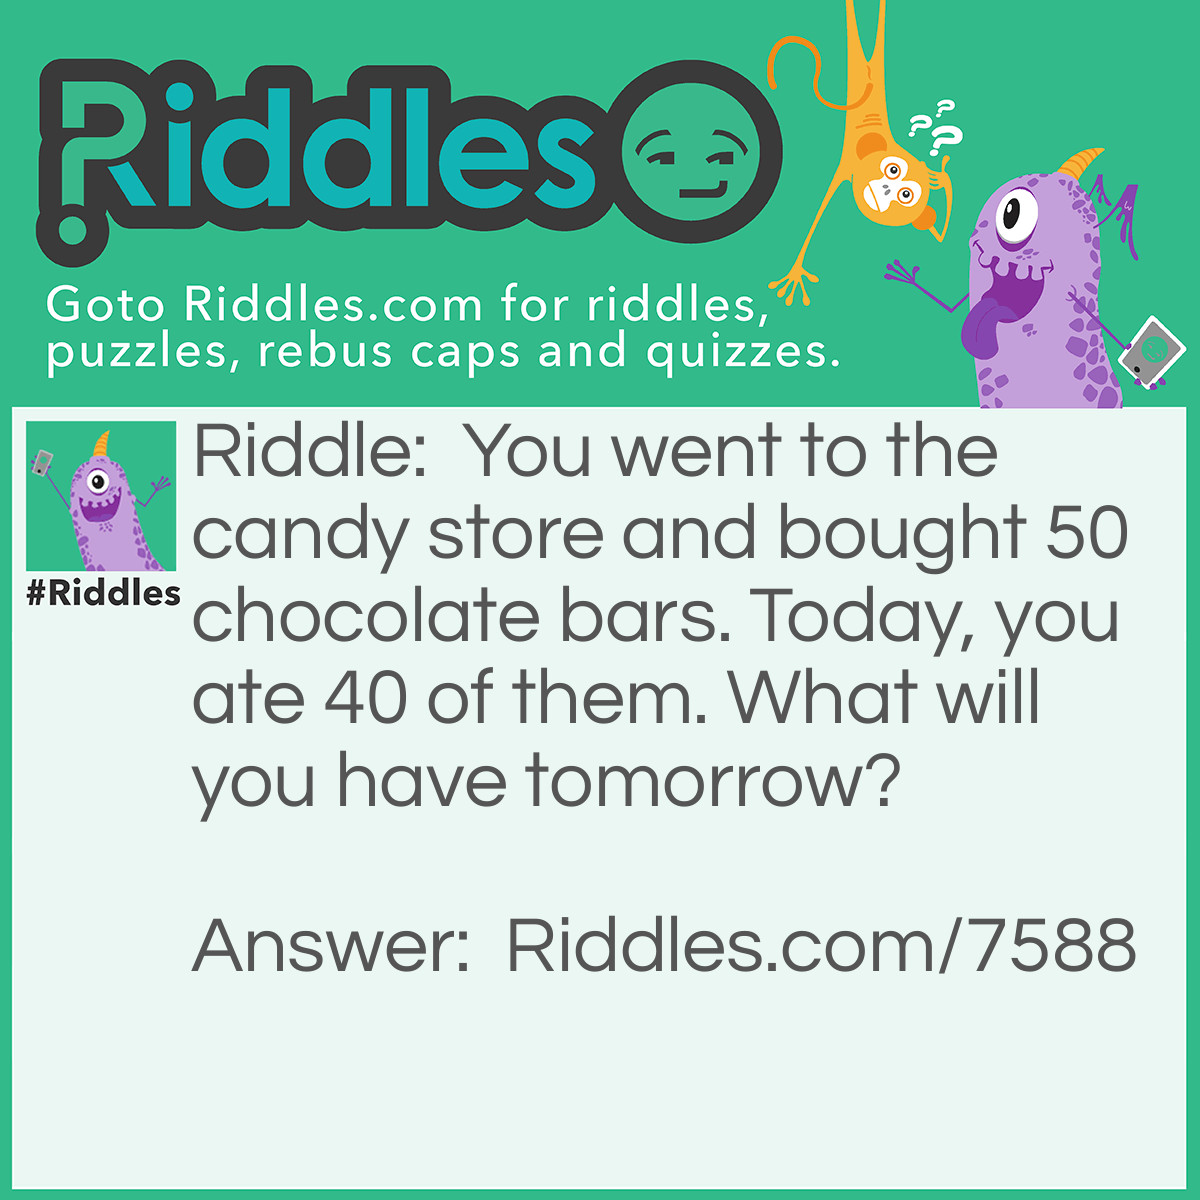 Riddle: You went to the candy store and bought 50 chocolate bars. Today, you ate 40 of them. What will you have tomorrow? Answer: Diabetes -_-